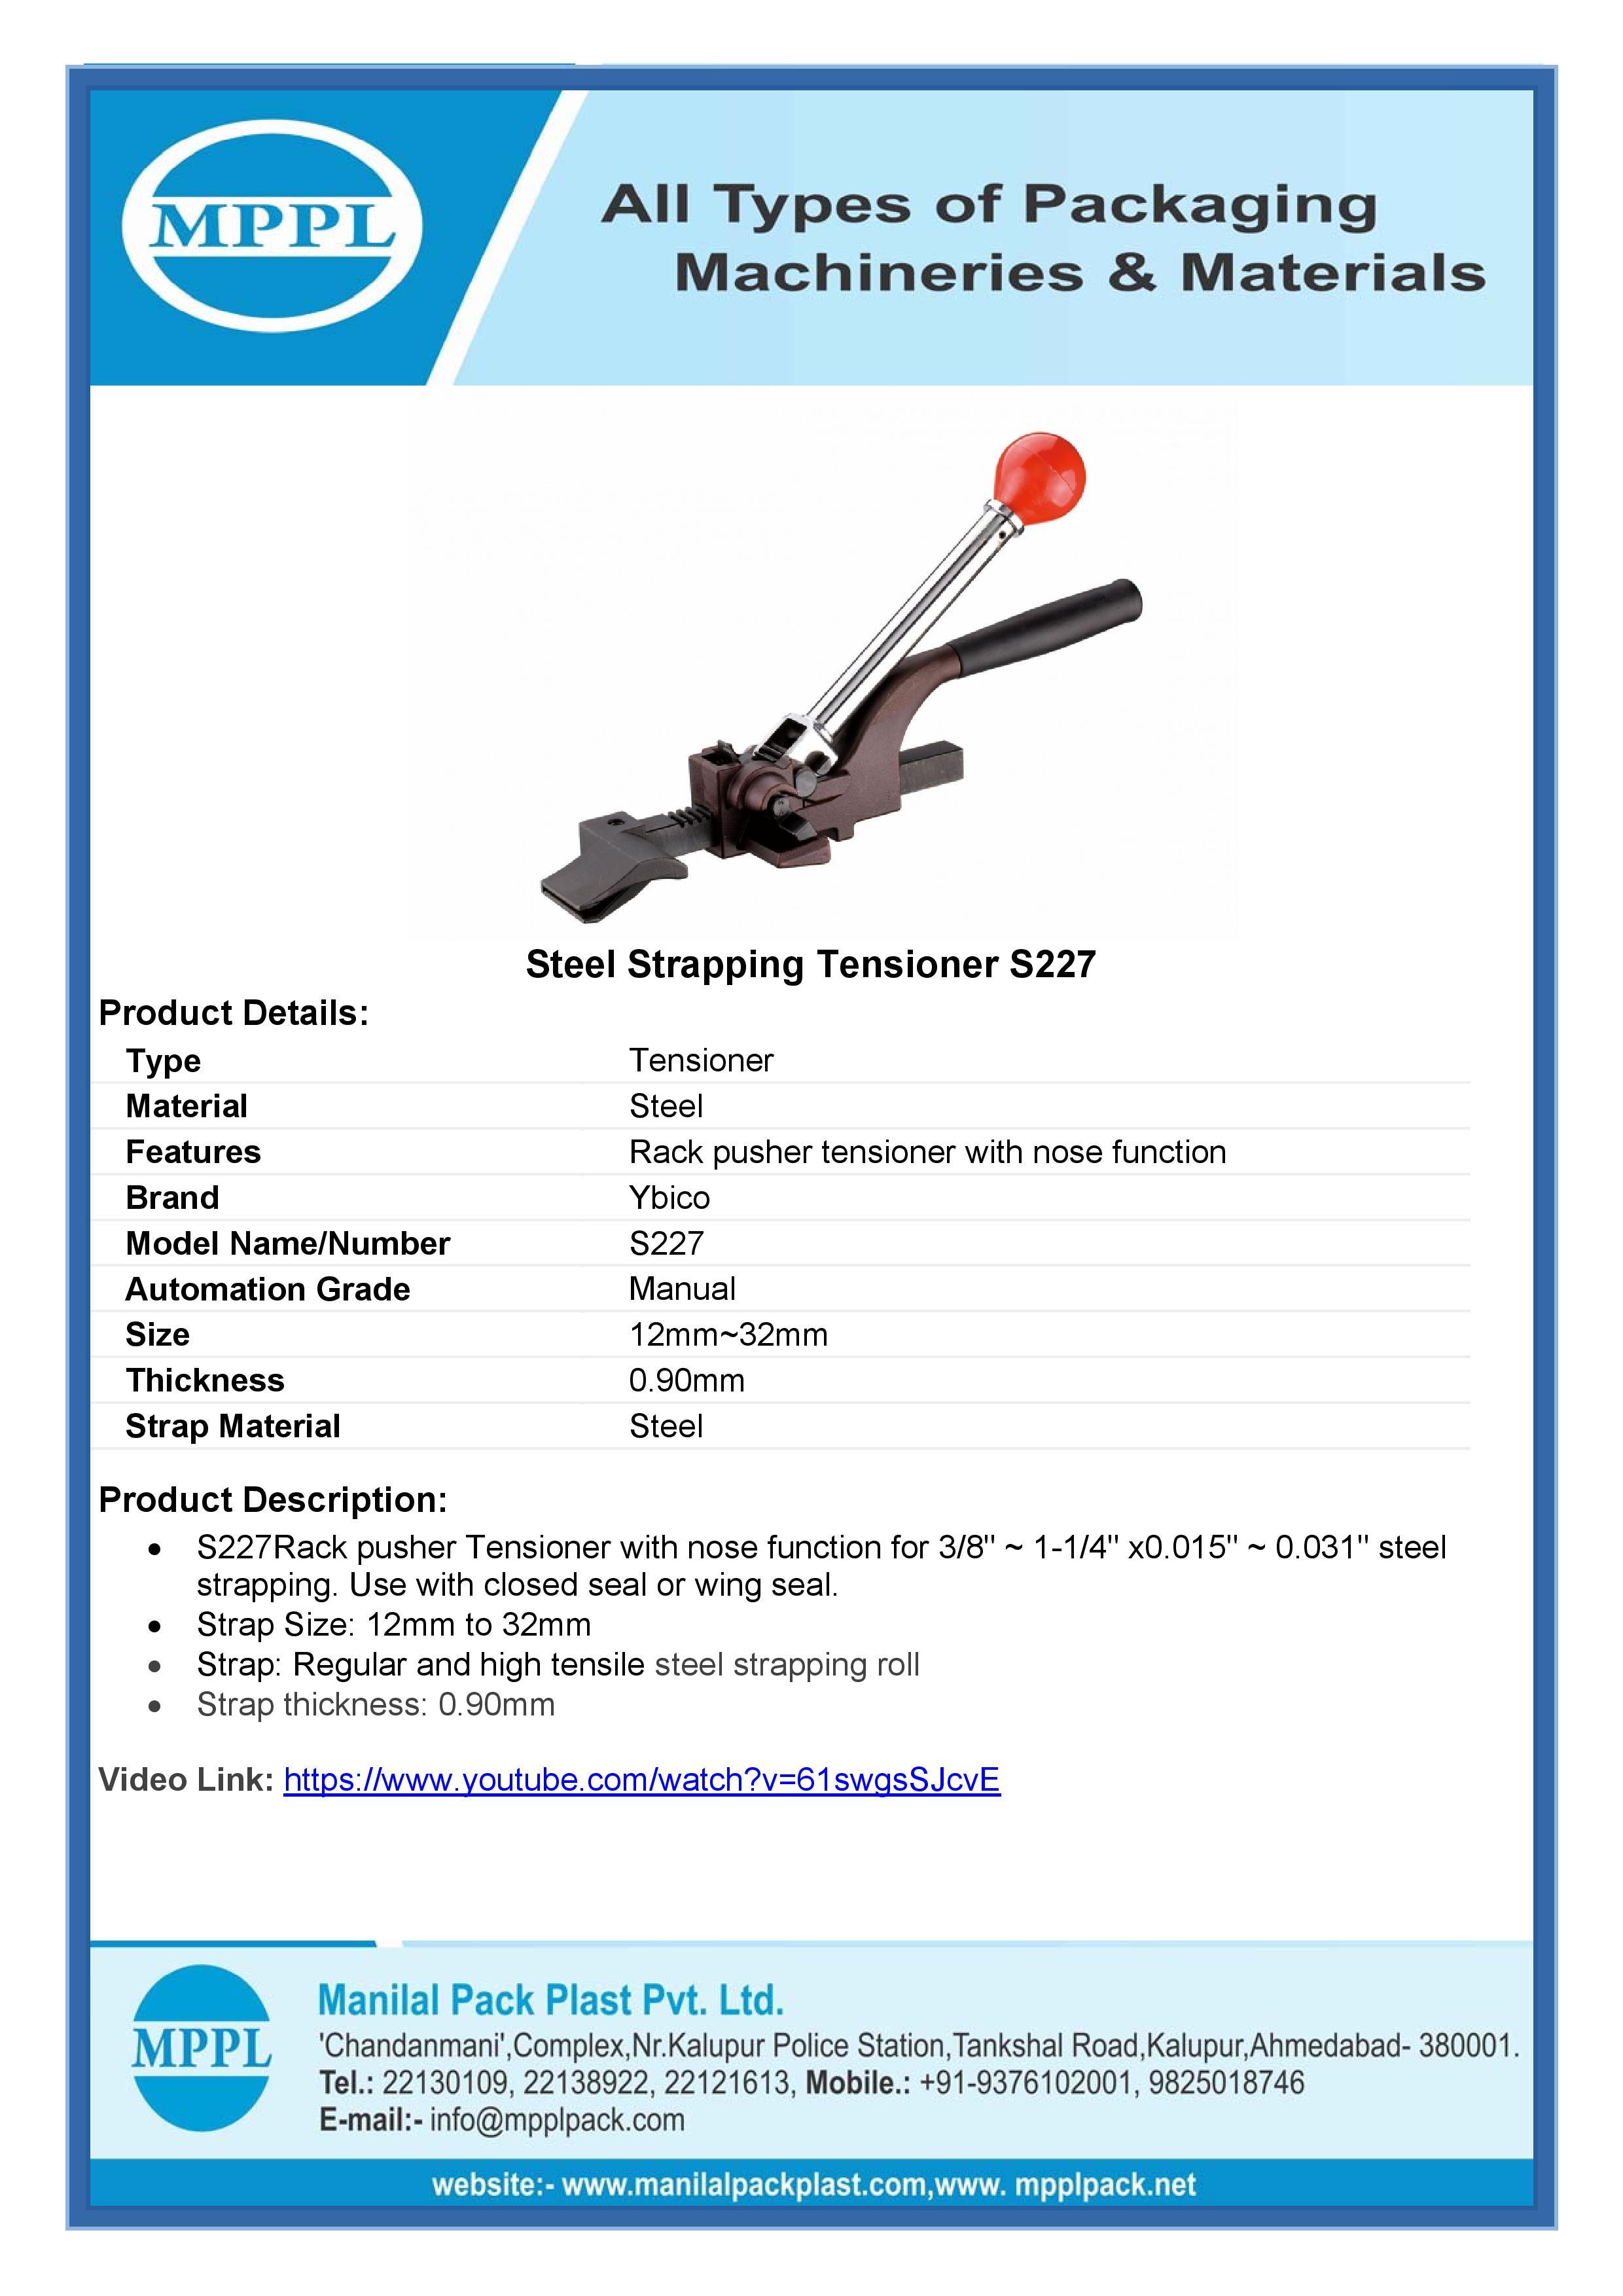 Steel Strapping Tensioner S227